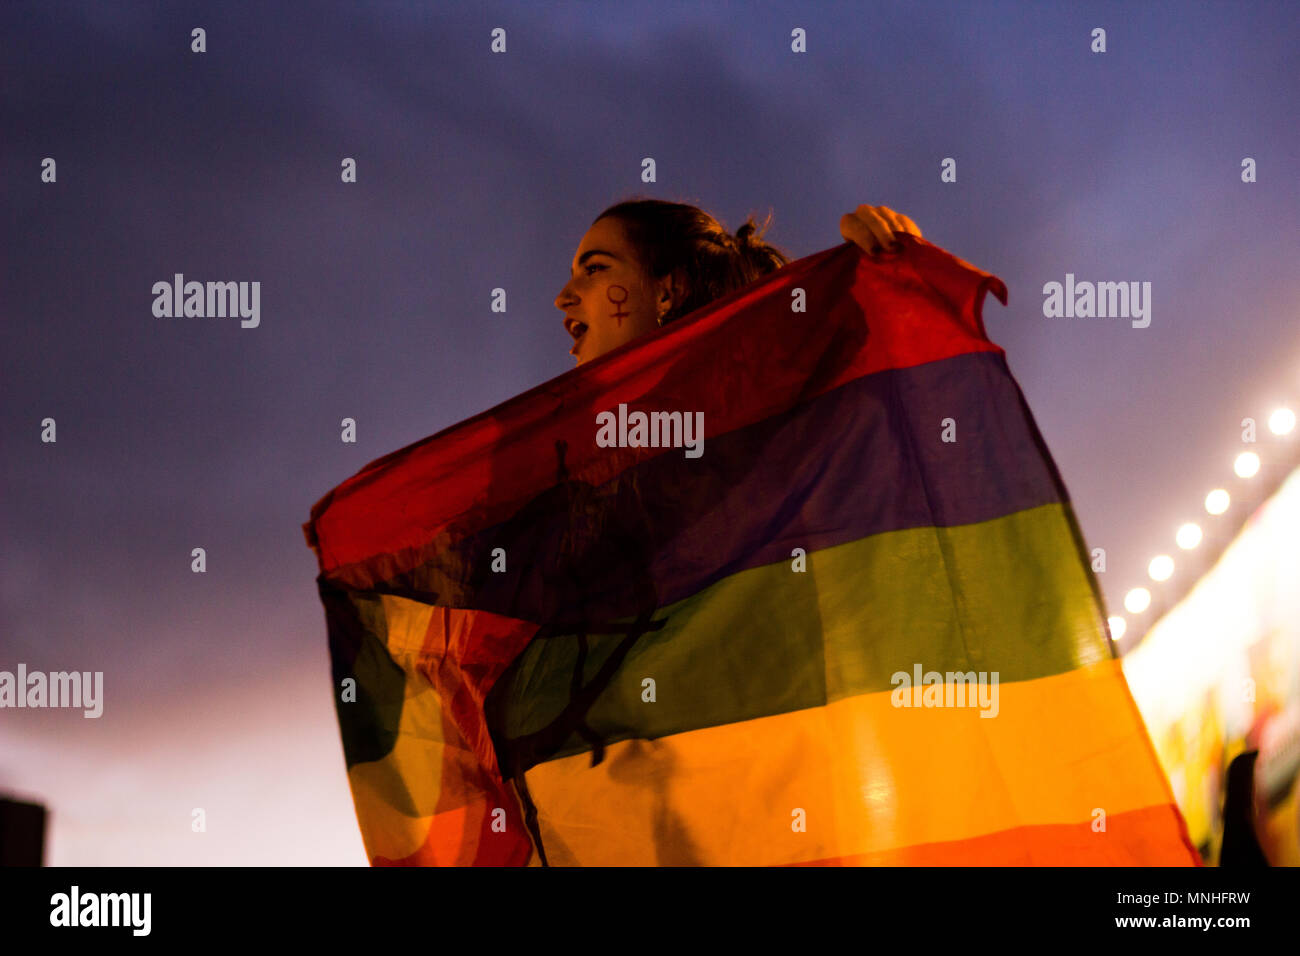 Feminist march / demonstration from march the 8/4/2018. Manifestación feminista del 8 de marzo de 2018. An LGBT activist holds a pride flag. Stock Photo